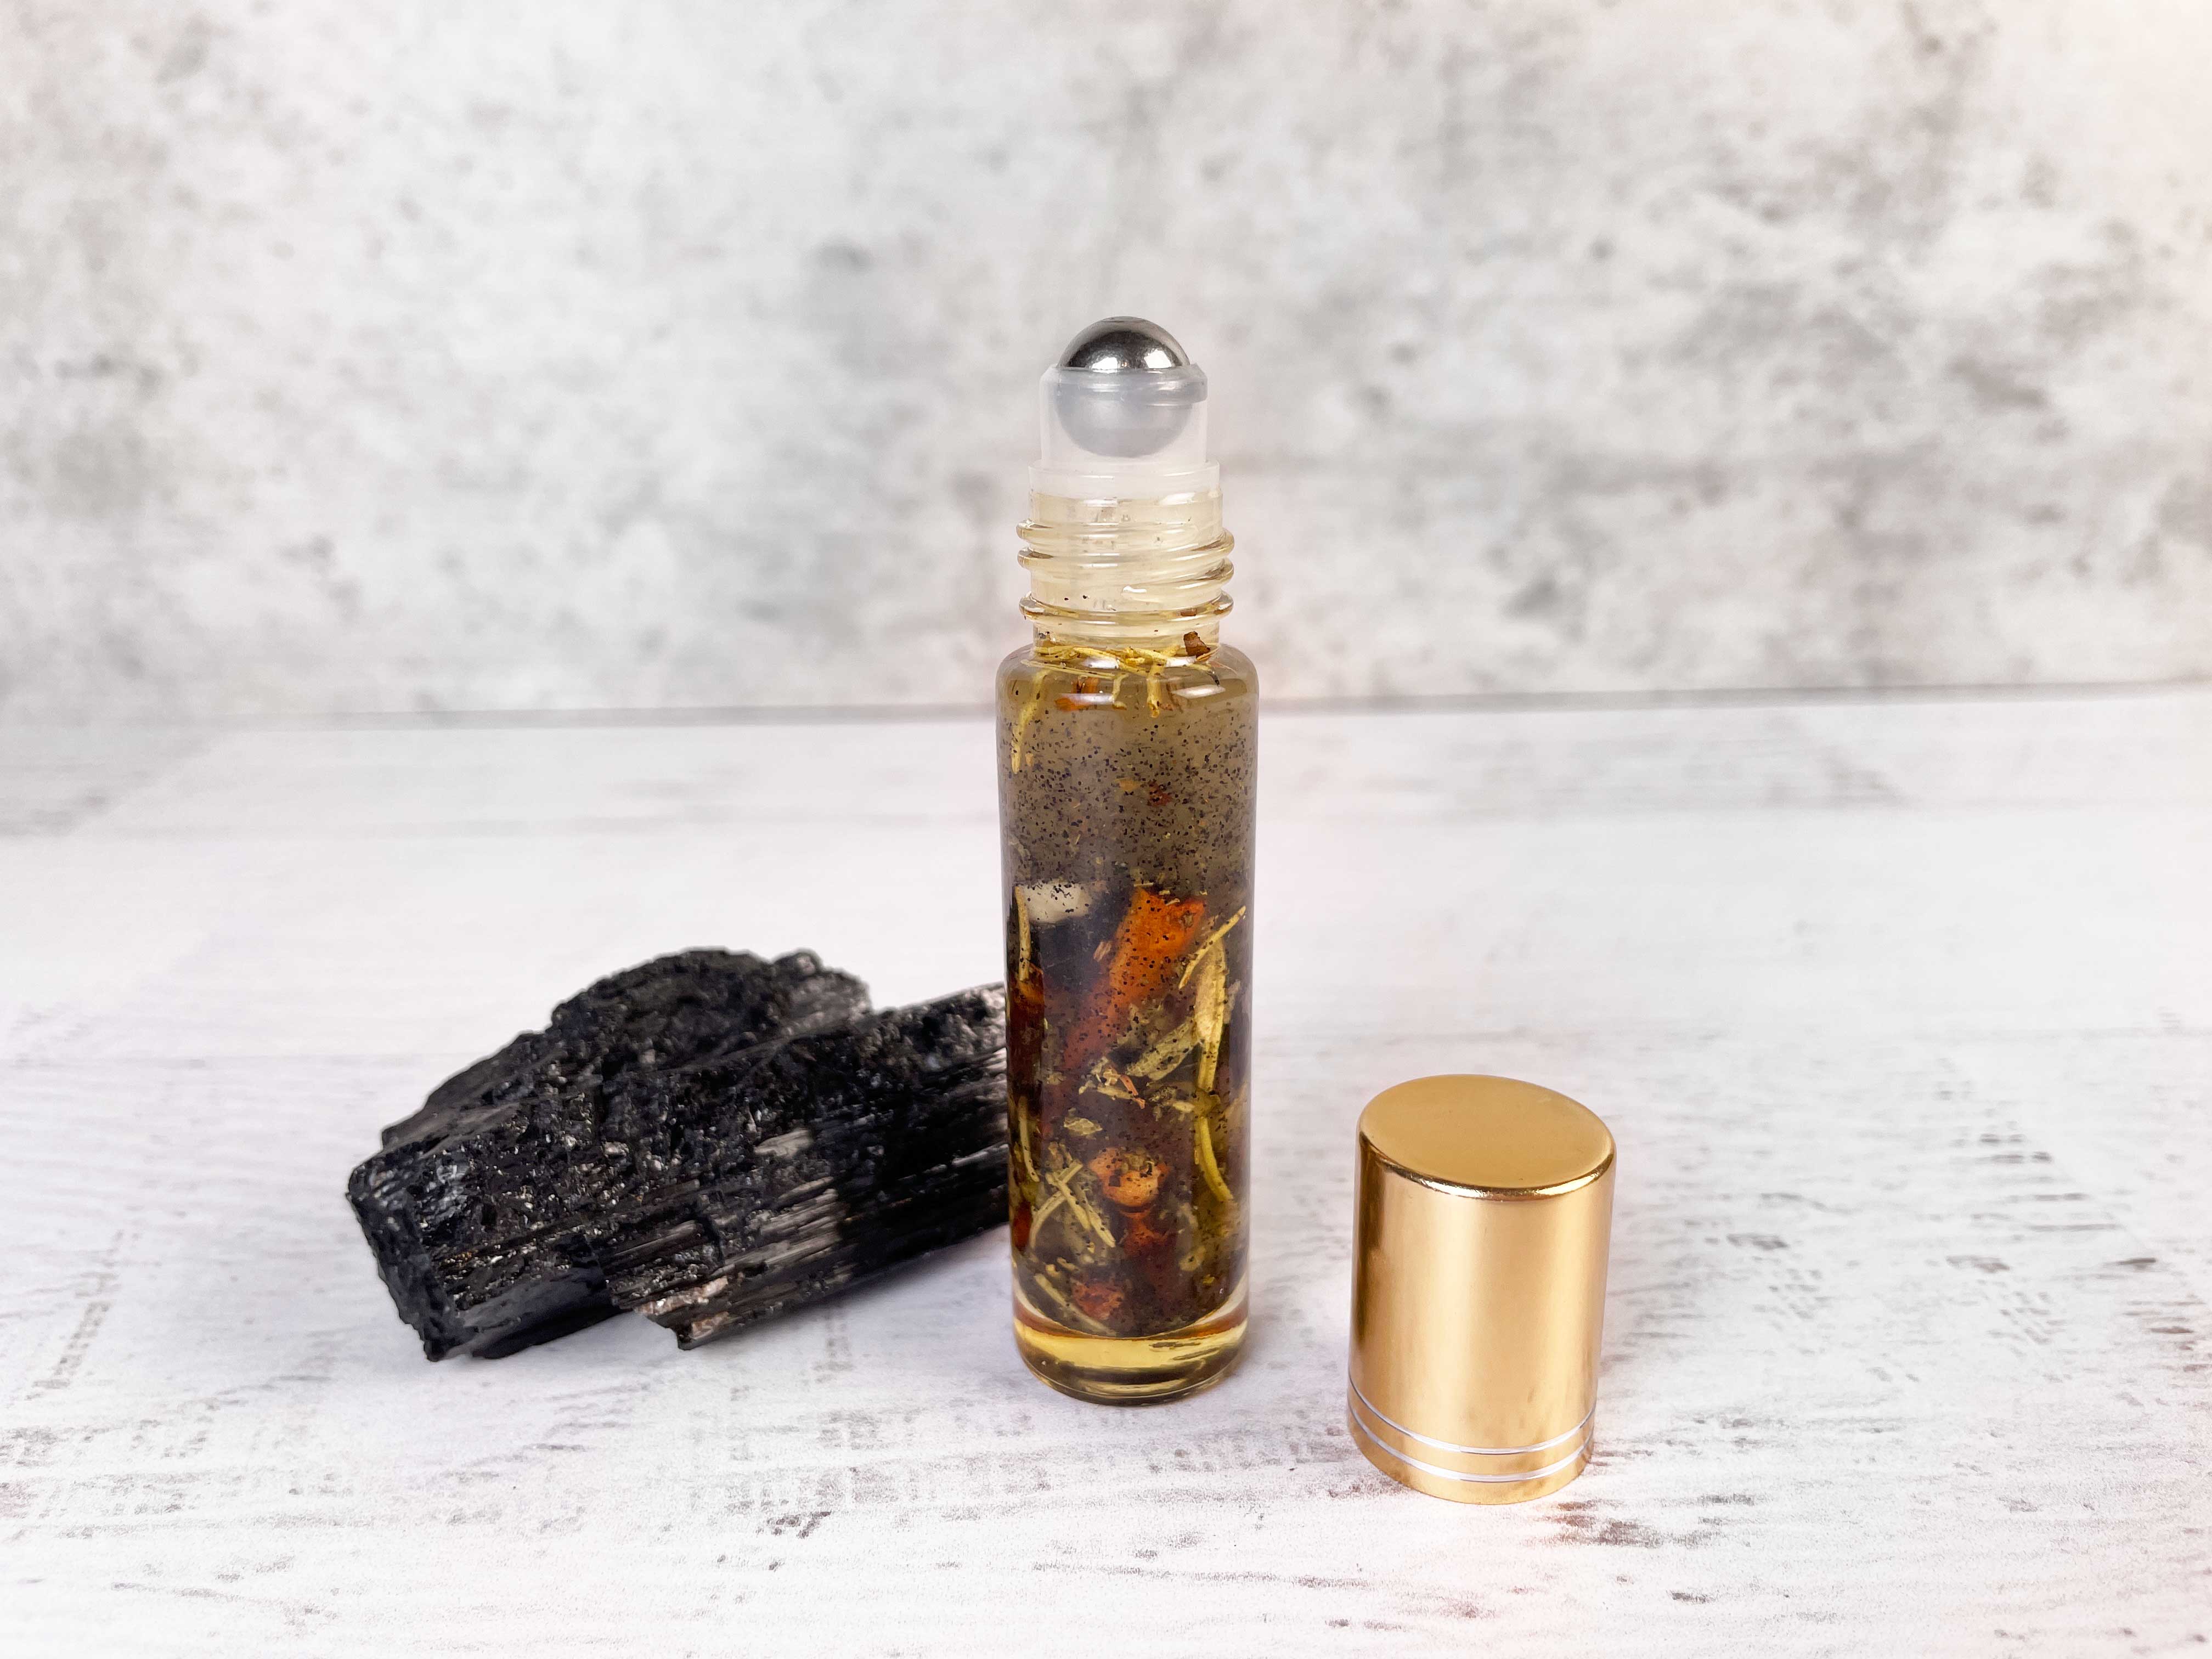 Buy Online Latest and Unique Grounding, Protection, Purifying Oil | Shop Best Spiritual Items - The Mystical Ritual